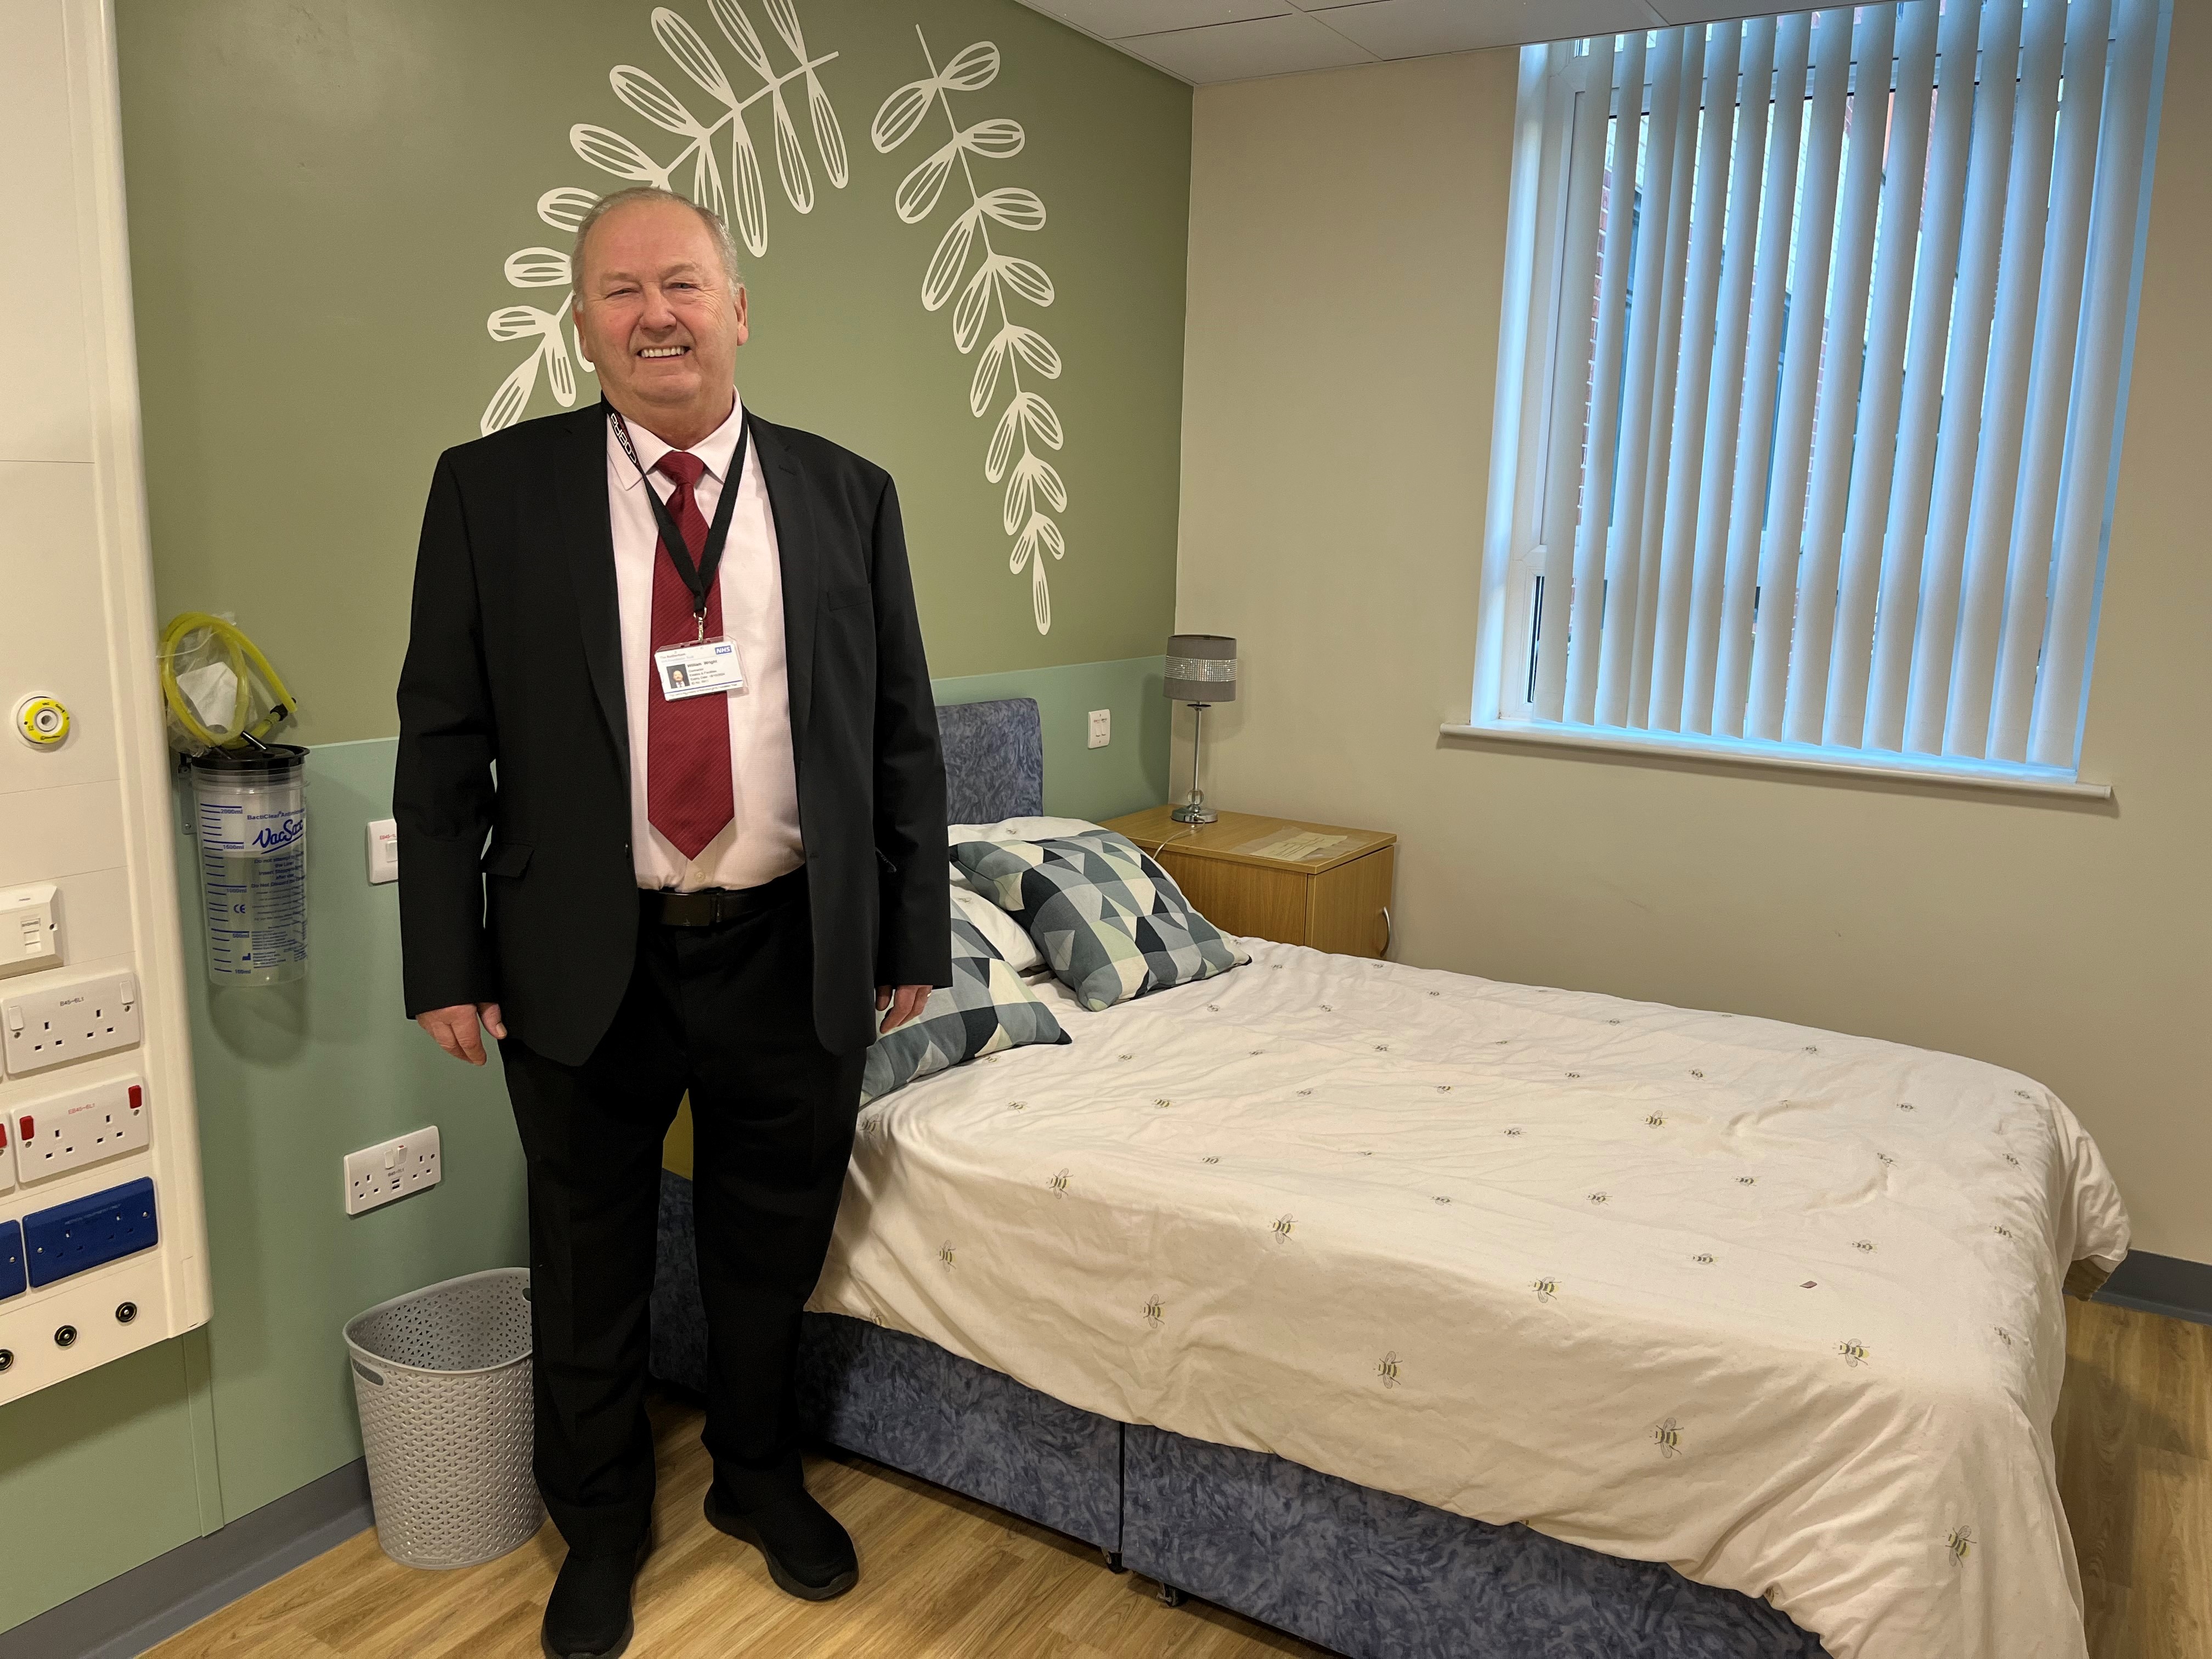 A person in a suit in one of the parent bedrooms on the neonatal unit